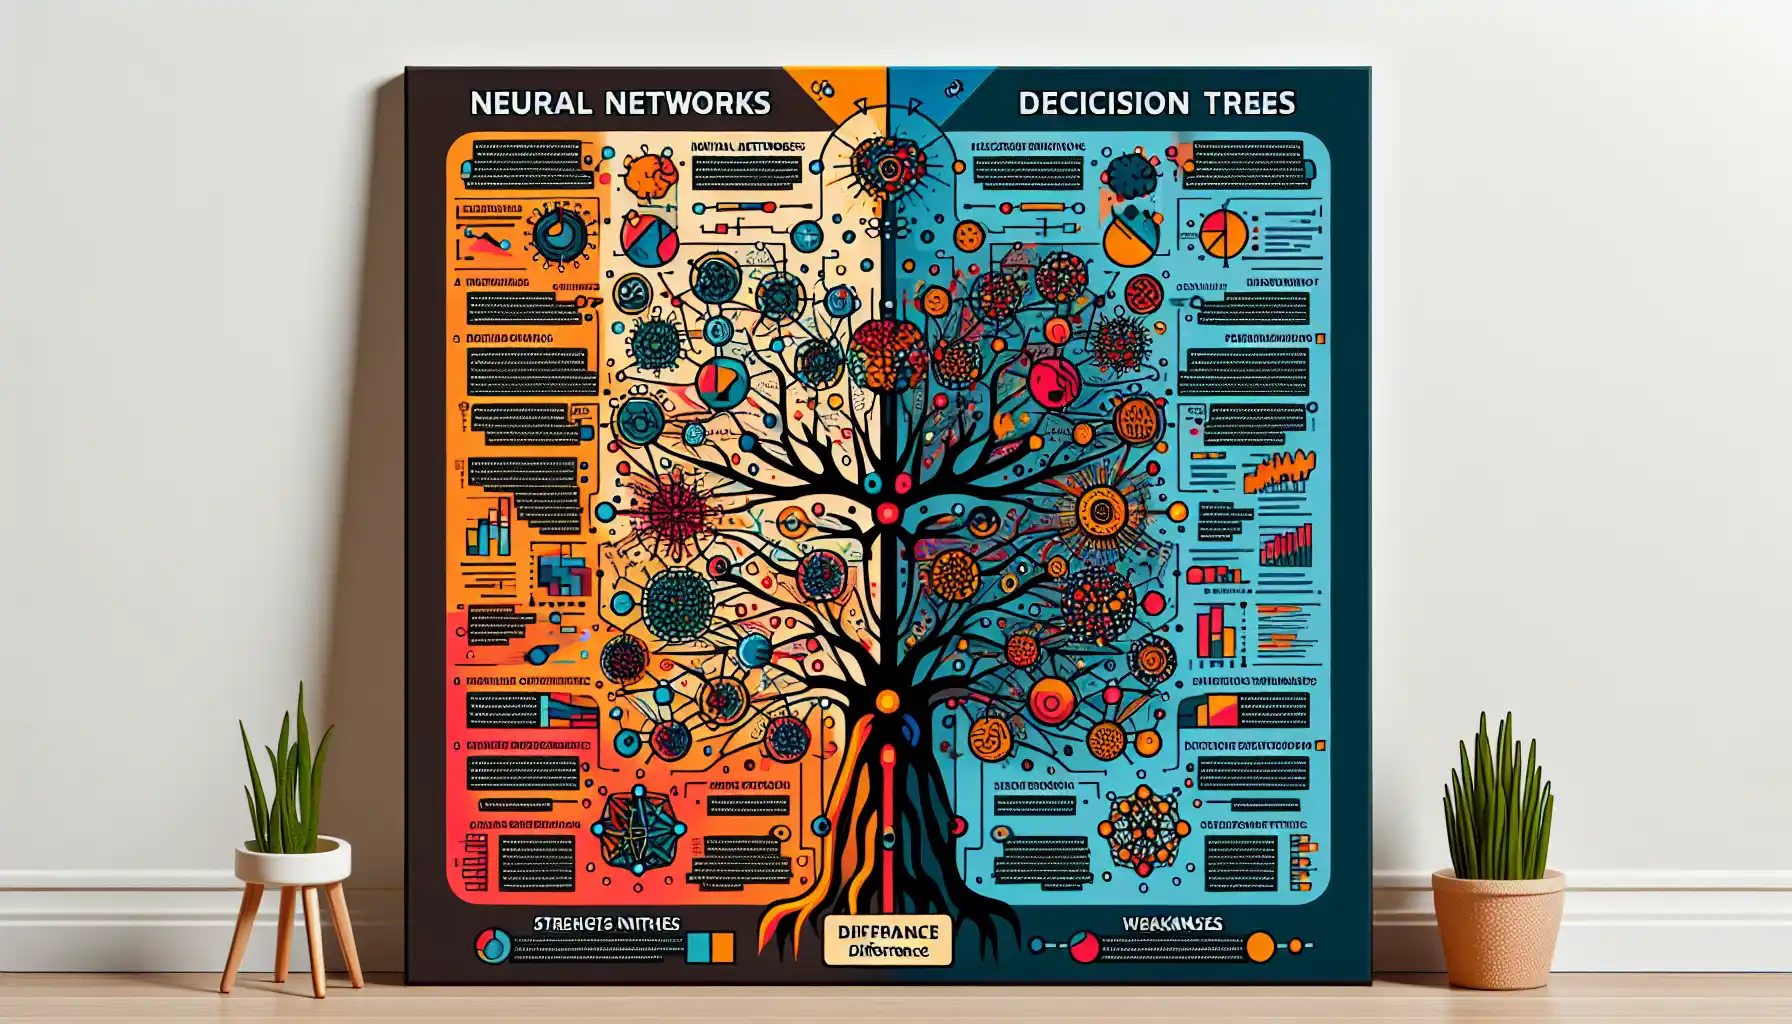 Difference Between Neural Networks and Decision Trees